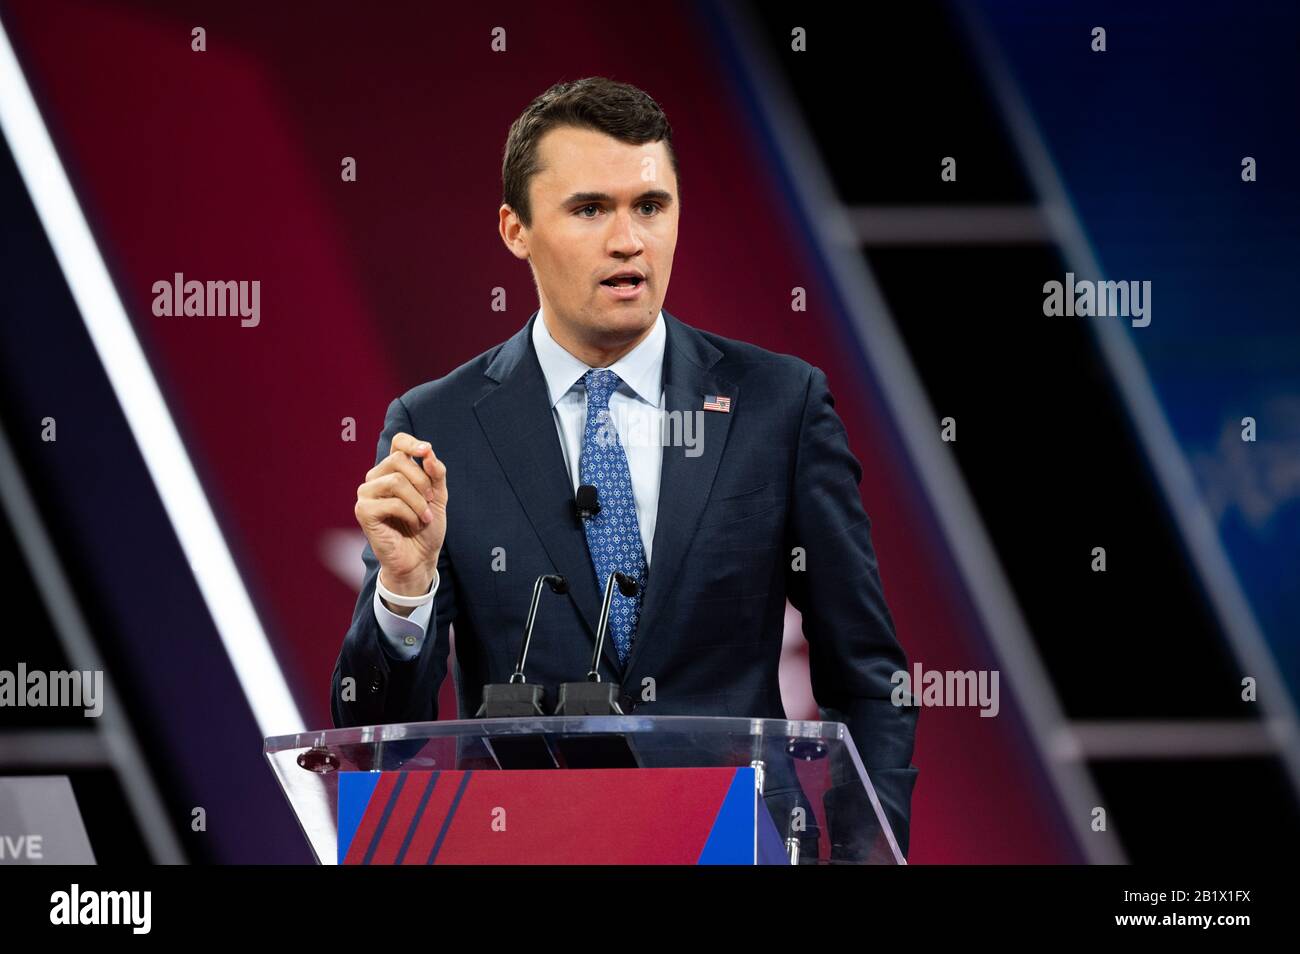 Oxon Hill, U.S. 27th Feb, 2020. February 27, 2020 - Oxon Hill, MD, United States: Charlie Kirk, Turning Point USA, speaking at the Conservative Political Action Conference (CPAC). (Photo by Michael Brochstein/Sipa USA) Credit: Sipa USA/Alamy Live News Stock Photo